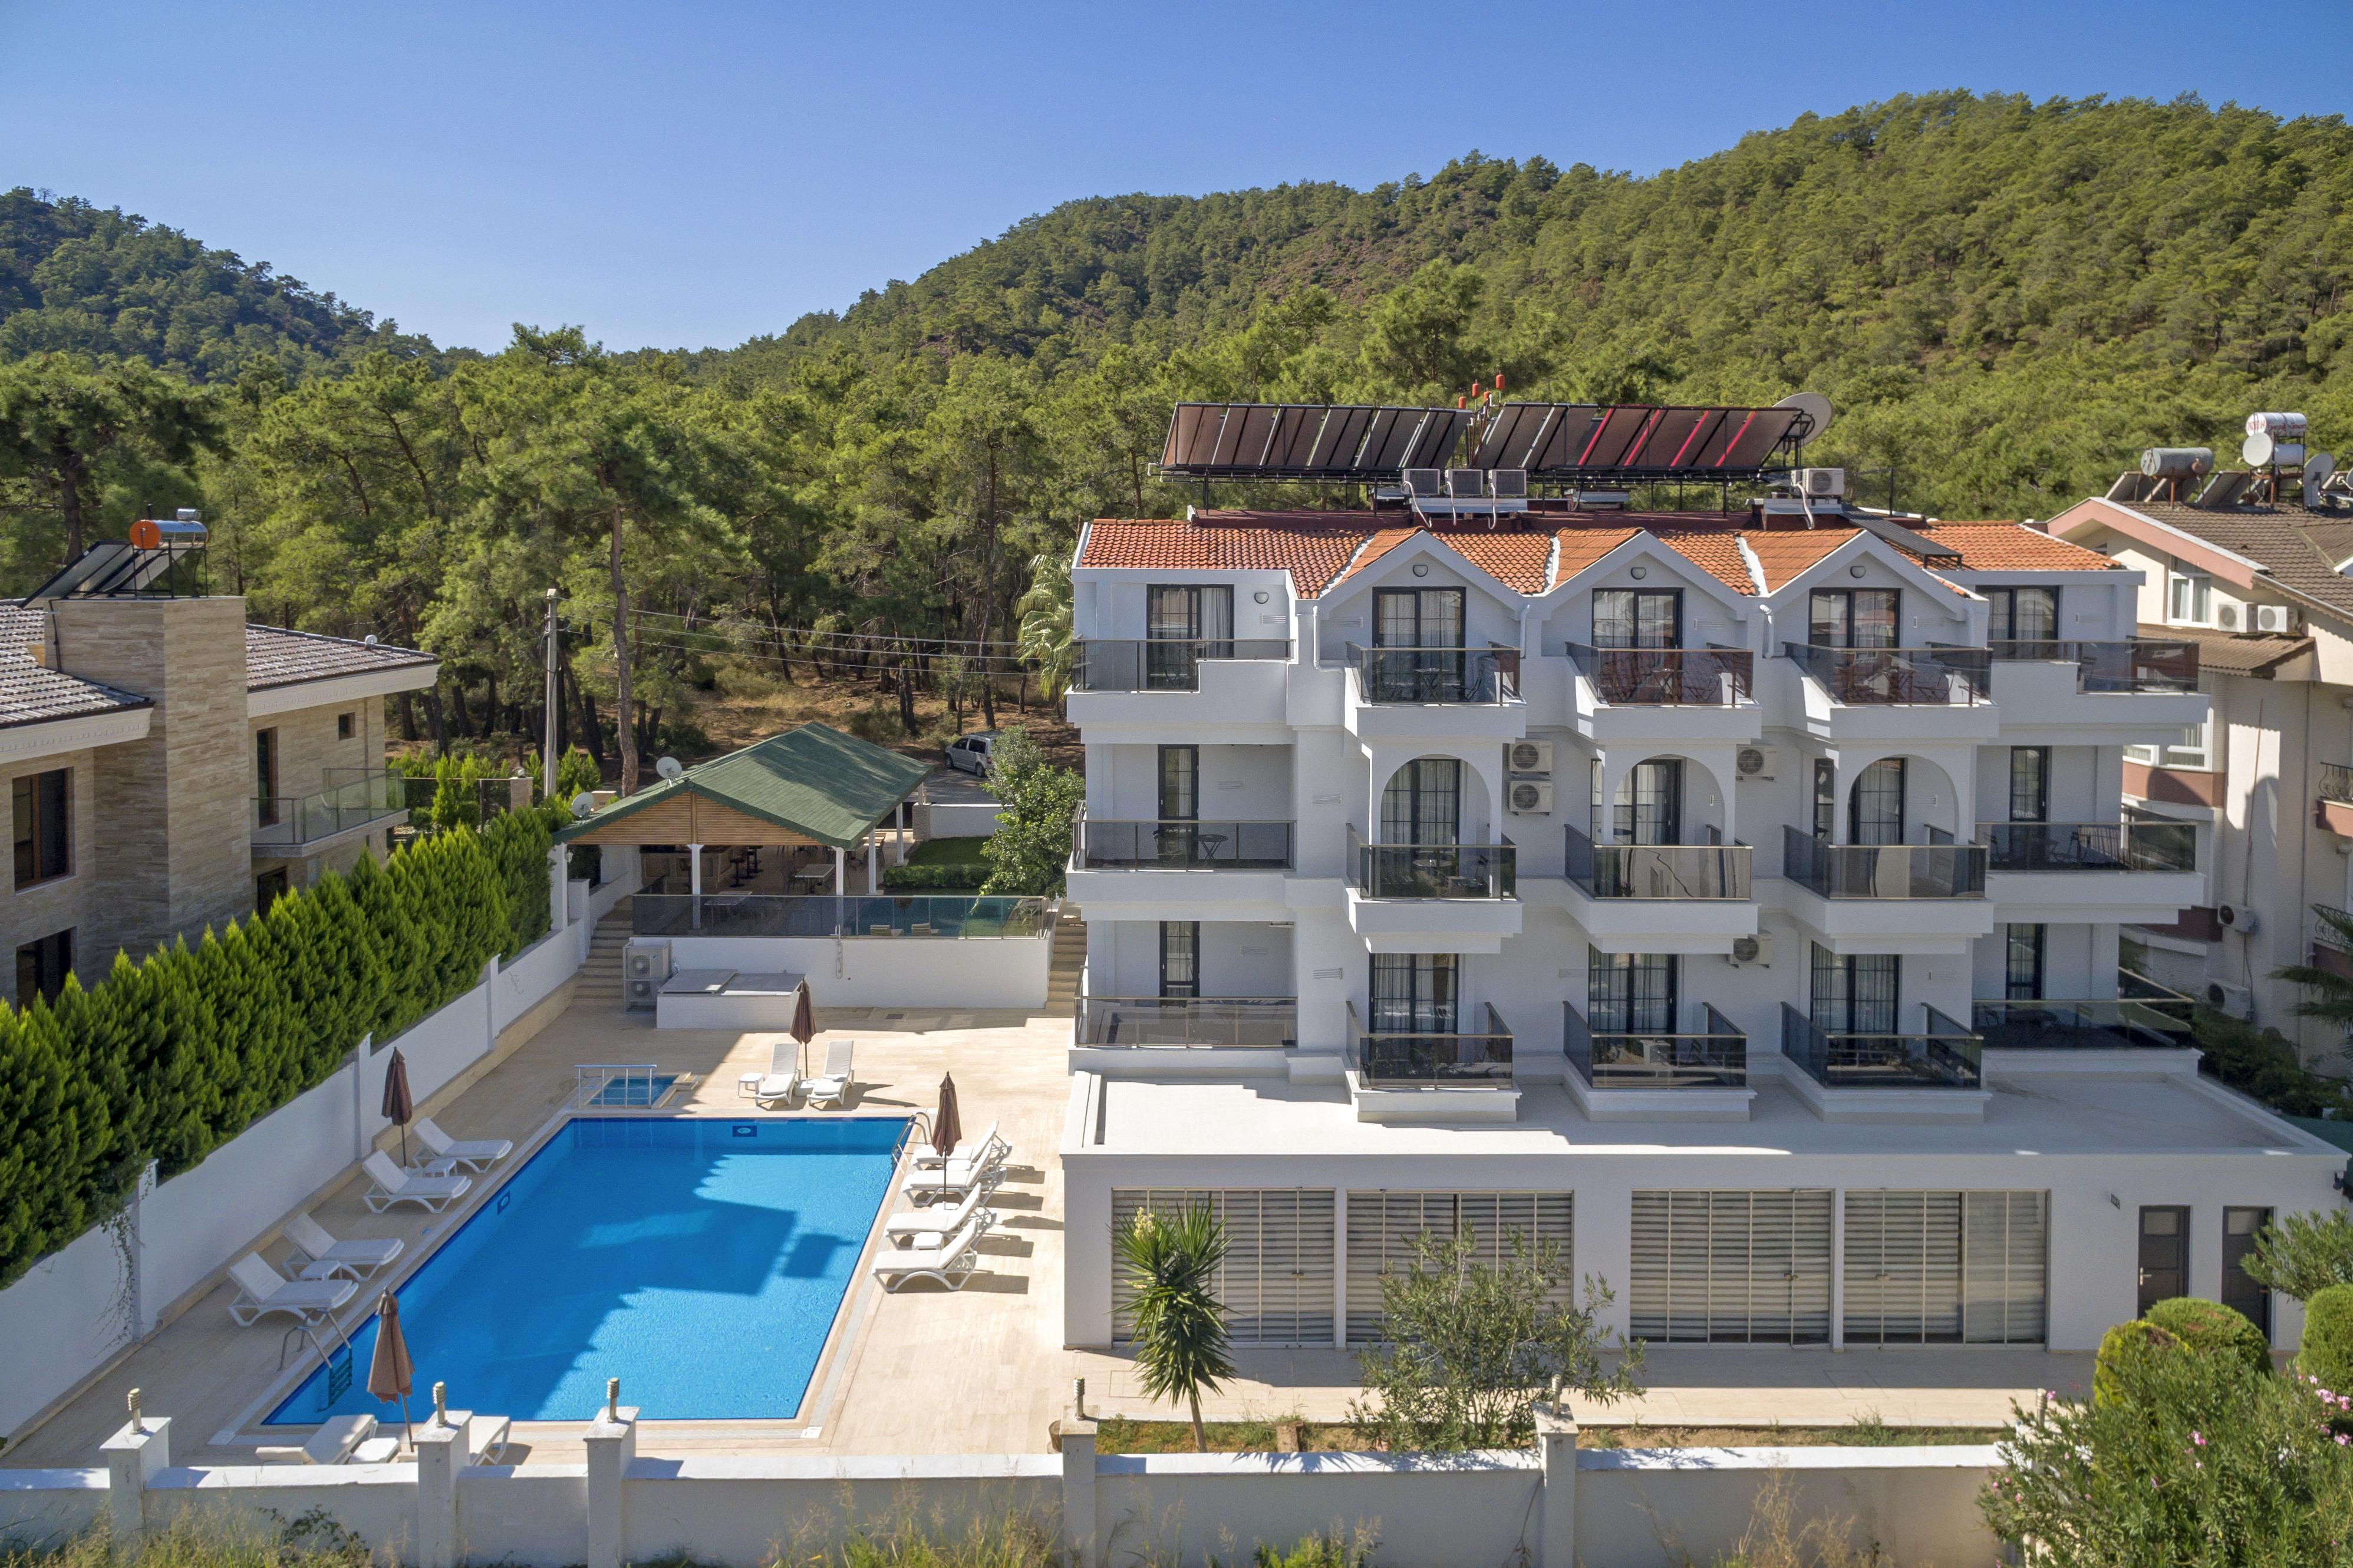 Forest Park Hotel Kemer Exterior photo